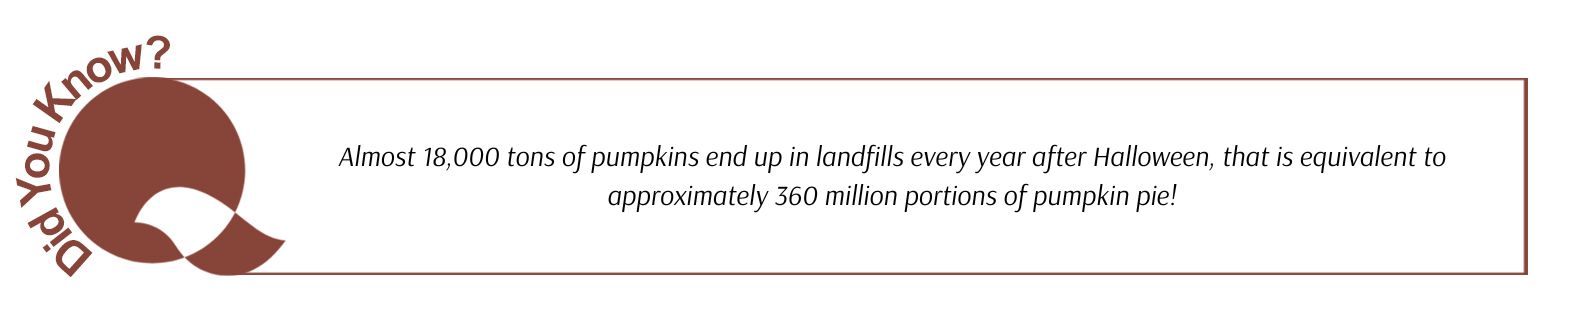 Did you know: Almost 18,000 tons of pumpkins end up in landfills every year after Halloween, that is equivalent to approximately 360 million portions of pumpkin pie!